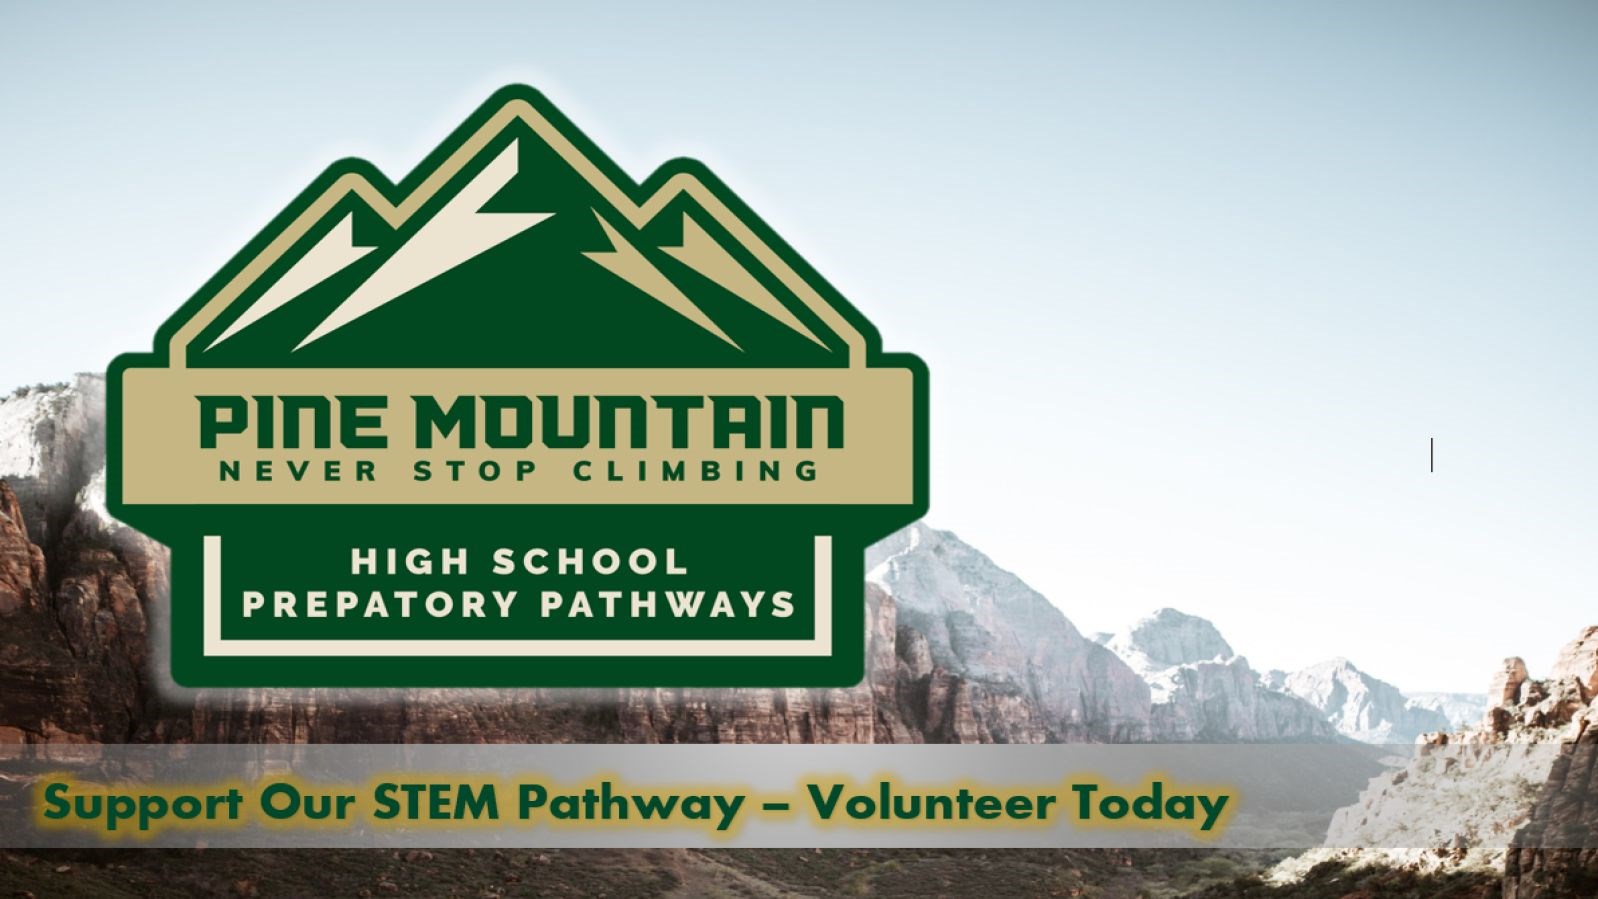 Volunteer to Support Our STEM Pathway Today